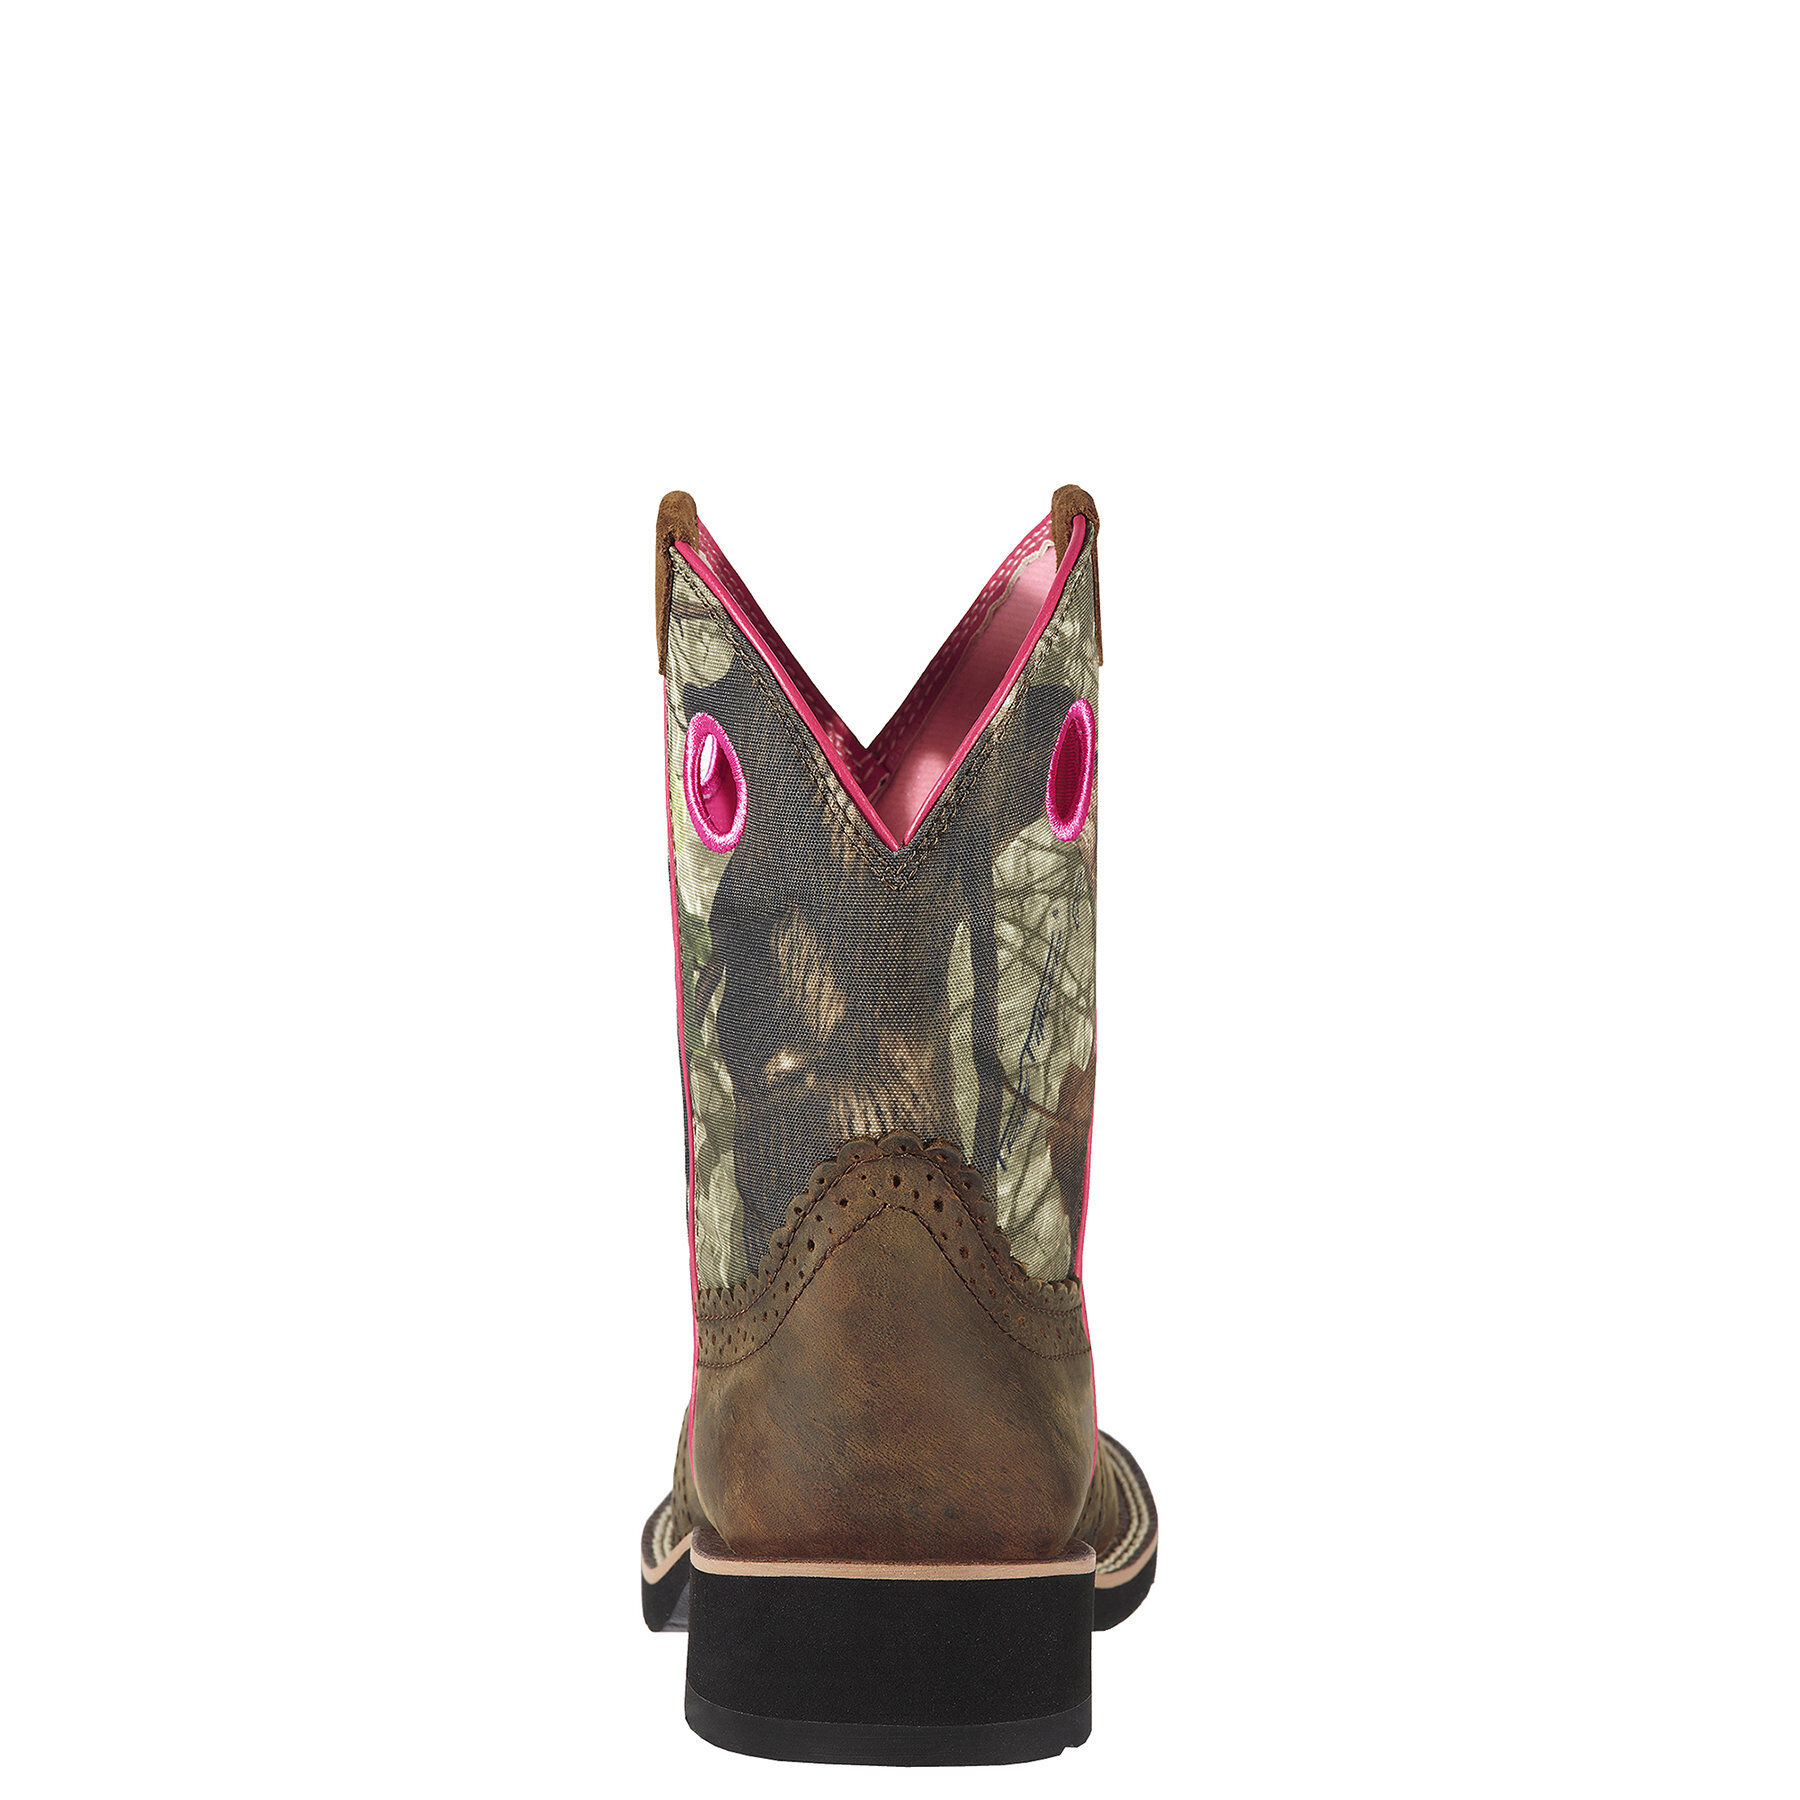 pink fat baby ariat boots